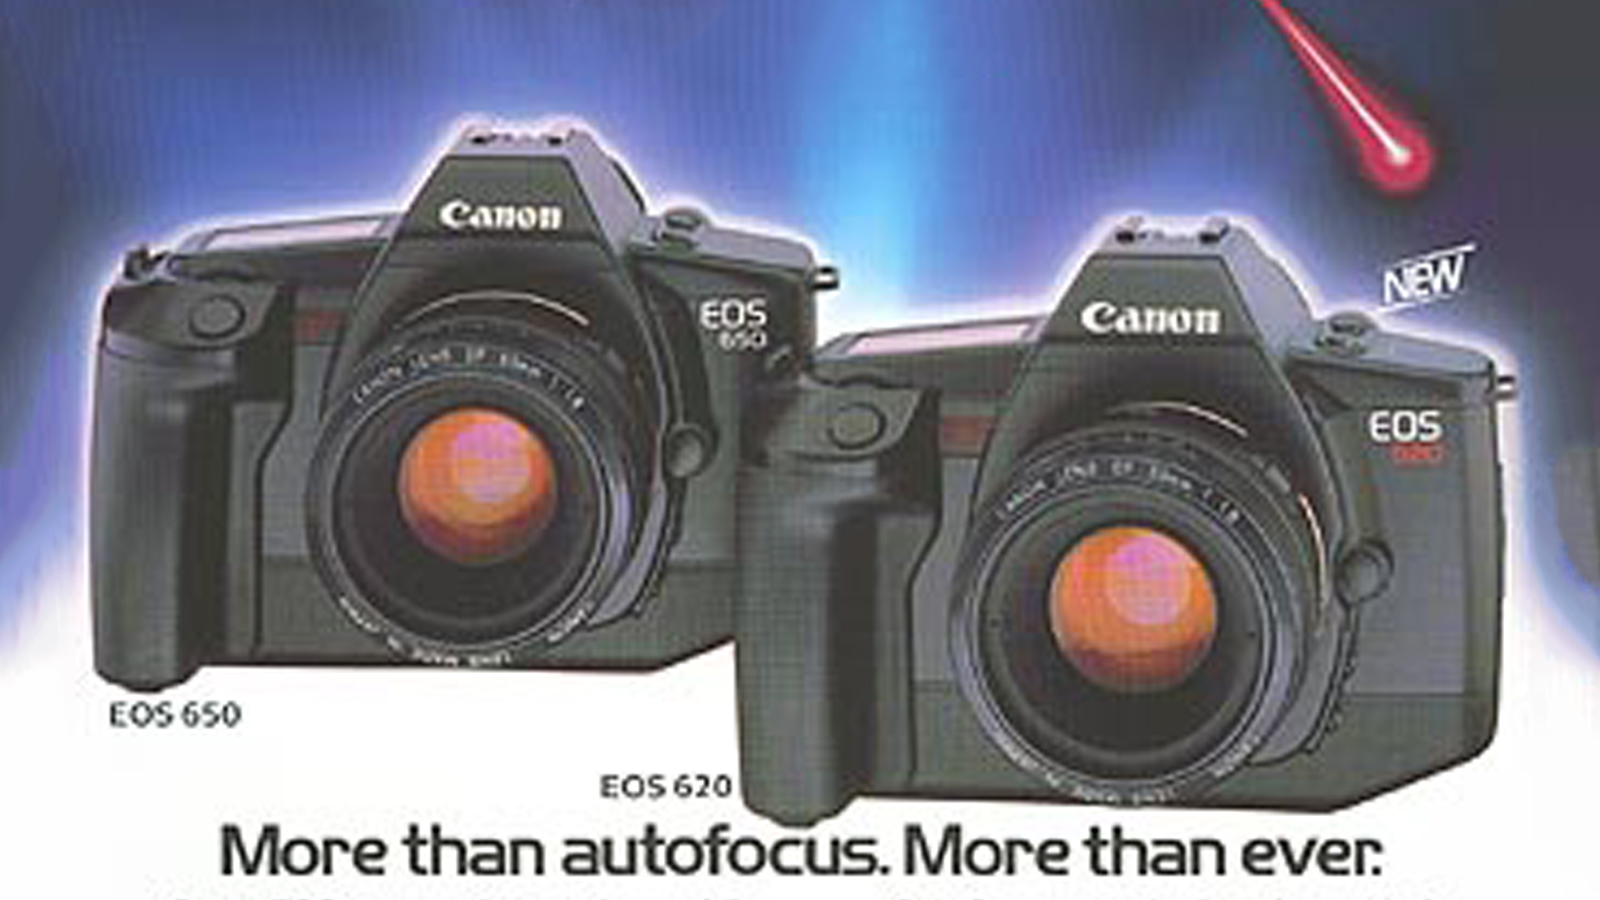 An advert for the Canon EOS 650 camera